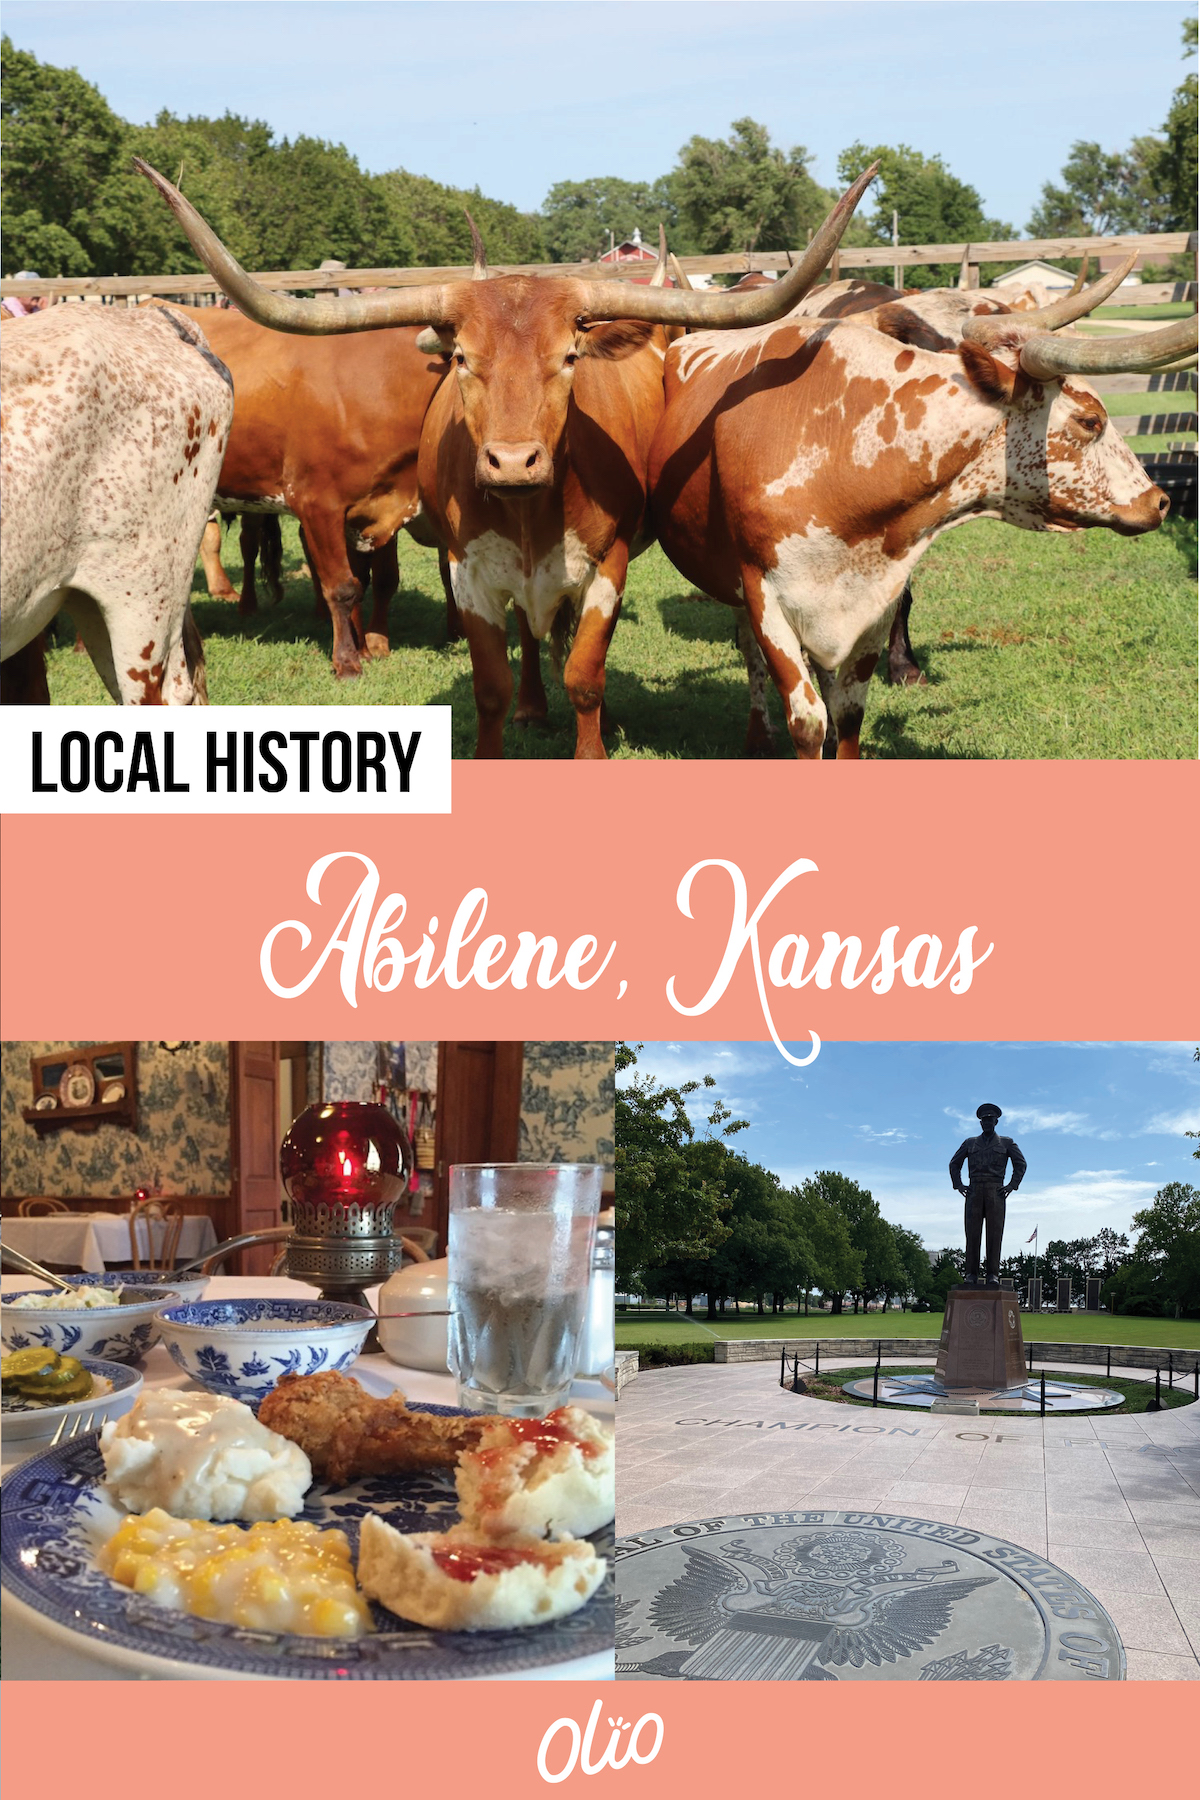 There are lots of unique ways to experience the history of Abilene Kansas. From a presidential library and museum to more than 40 sites on the National Register of Historic Places, there’s a historic site for every sort of traveler in this Kansas community. Explore Old Abilene Town, ride a C.W. Parker Carousel, learn about the 34th President of the United States and so much more.